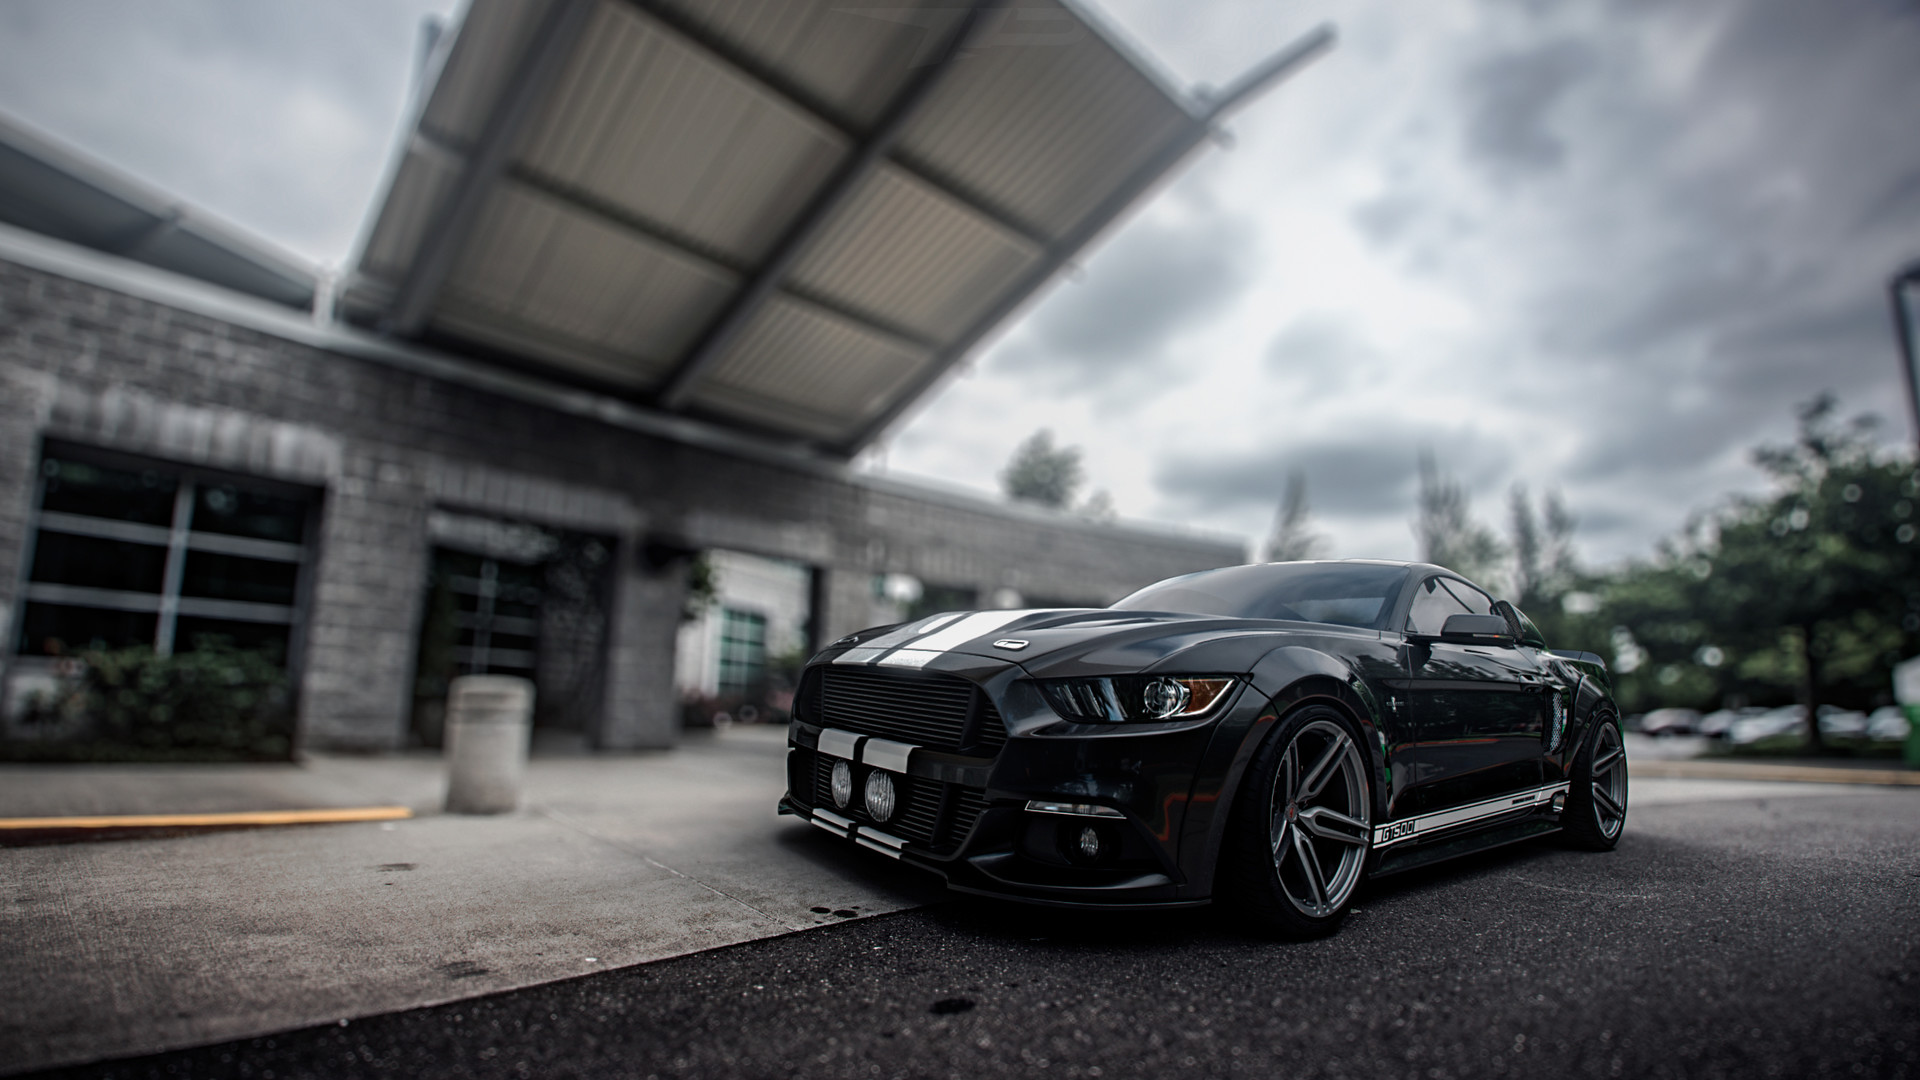 General 1920x1080 Nikita Fedyanin vehicle Ford Mustang CGI city Ford Ford Mustang S550 car